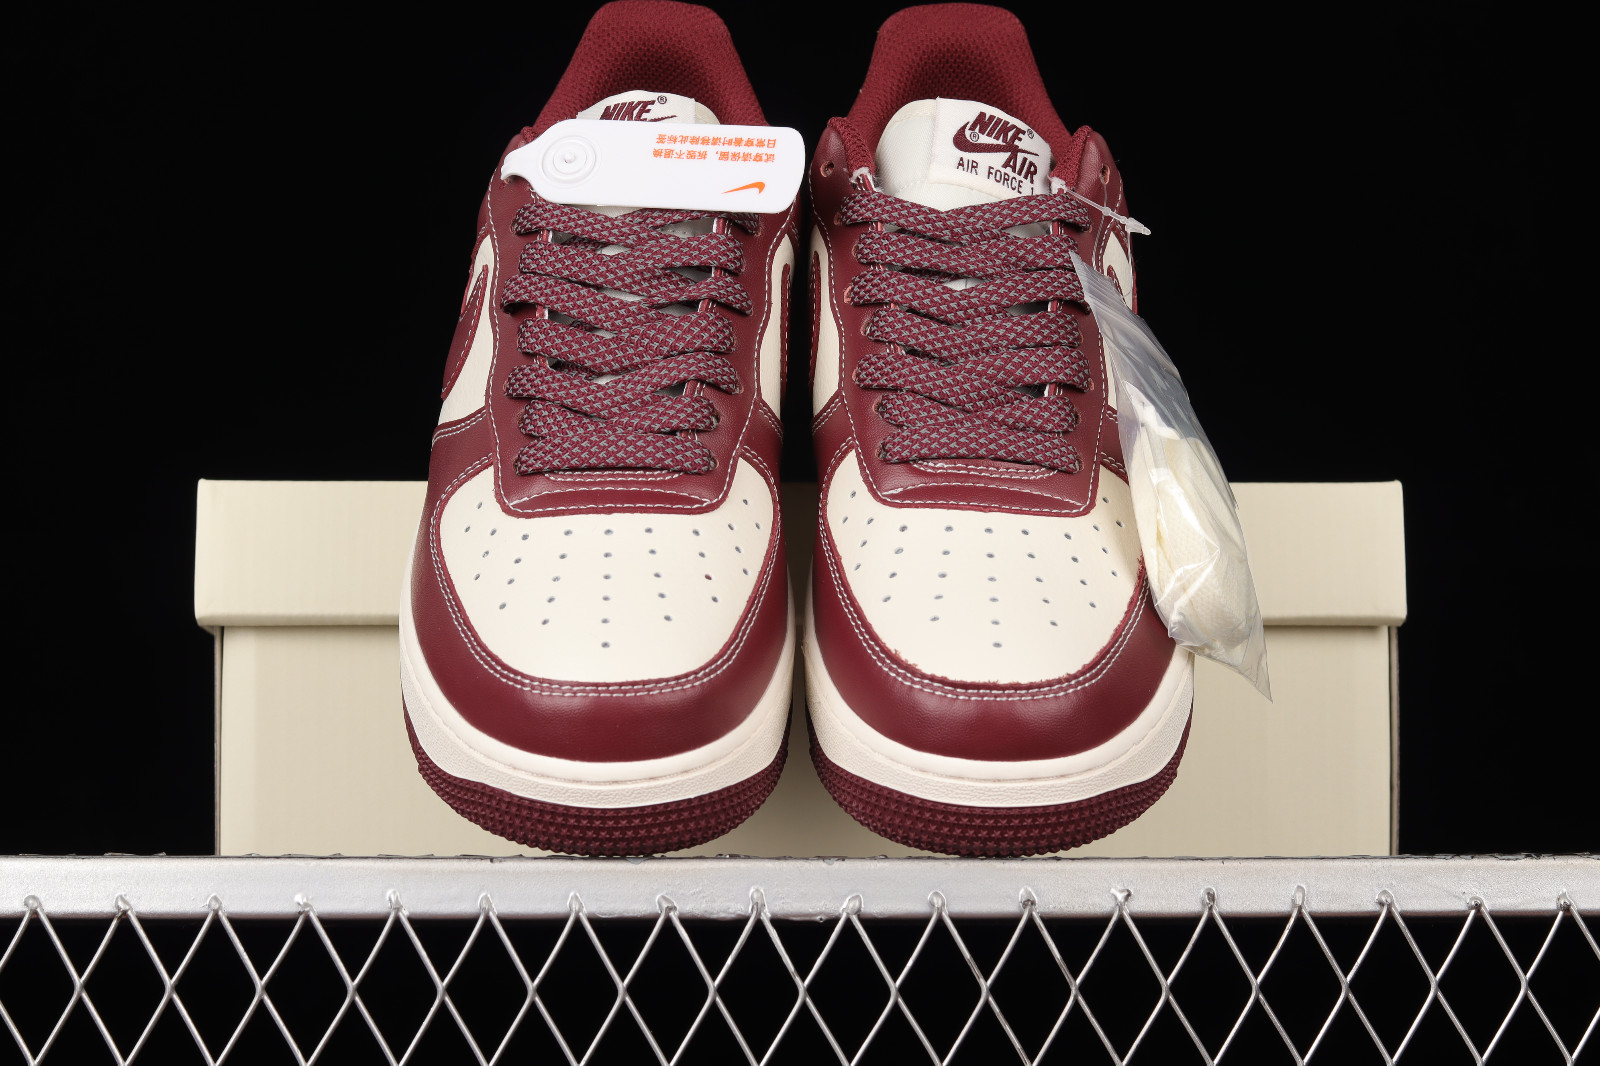 Nike Air Force 1 Low Satin White/Red DX6541-100